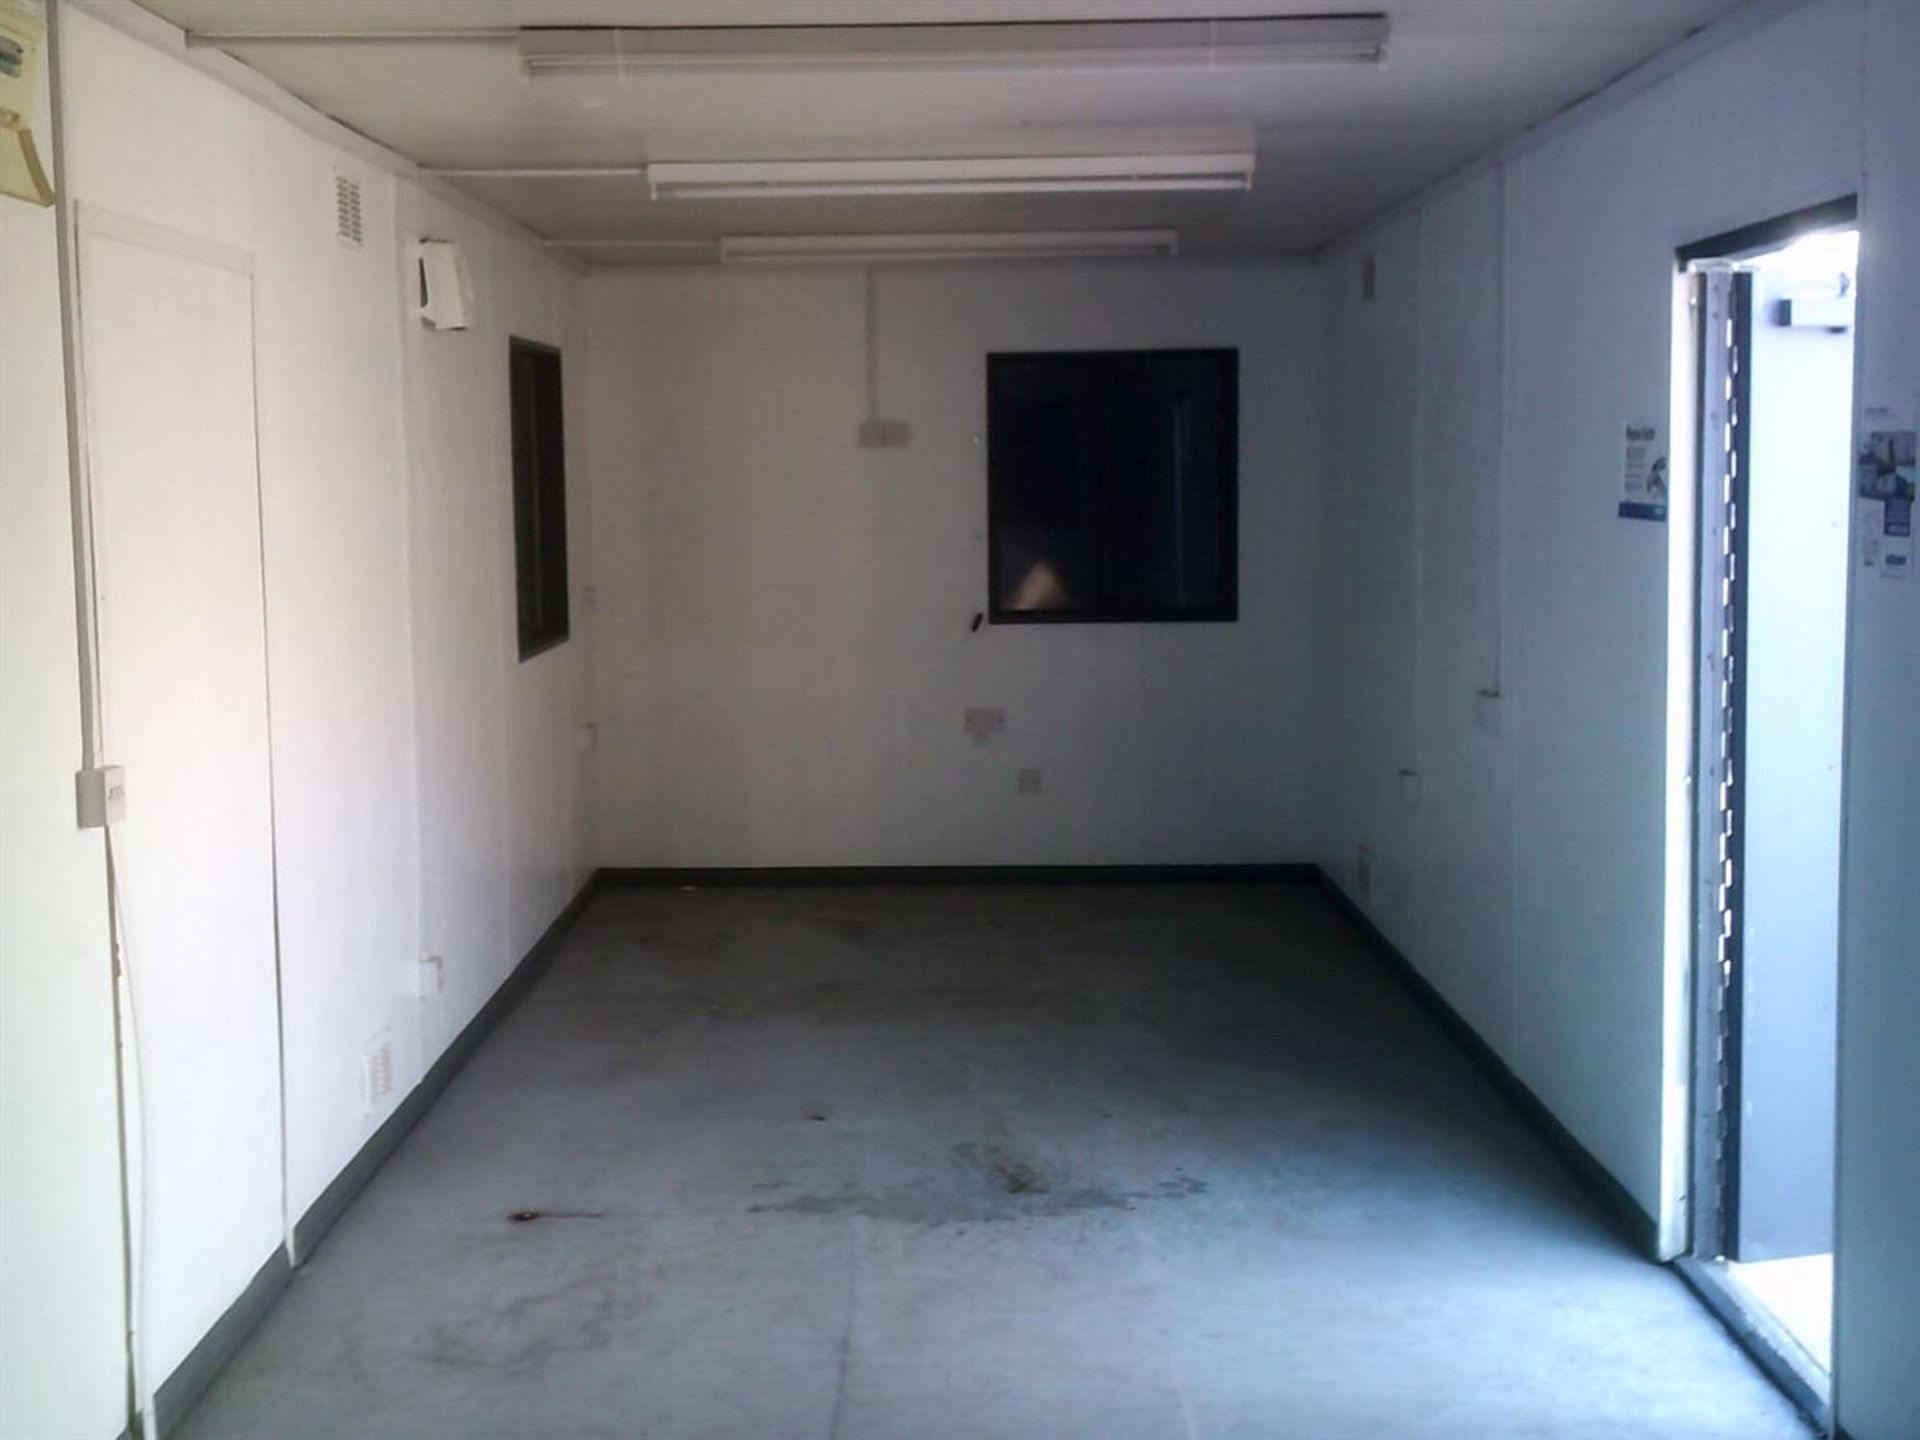 ESP13727 32ft x 10ft Anti-Vandal Canteen/Changing Room - Image 3 of 5